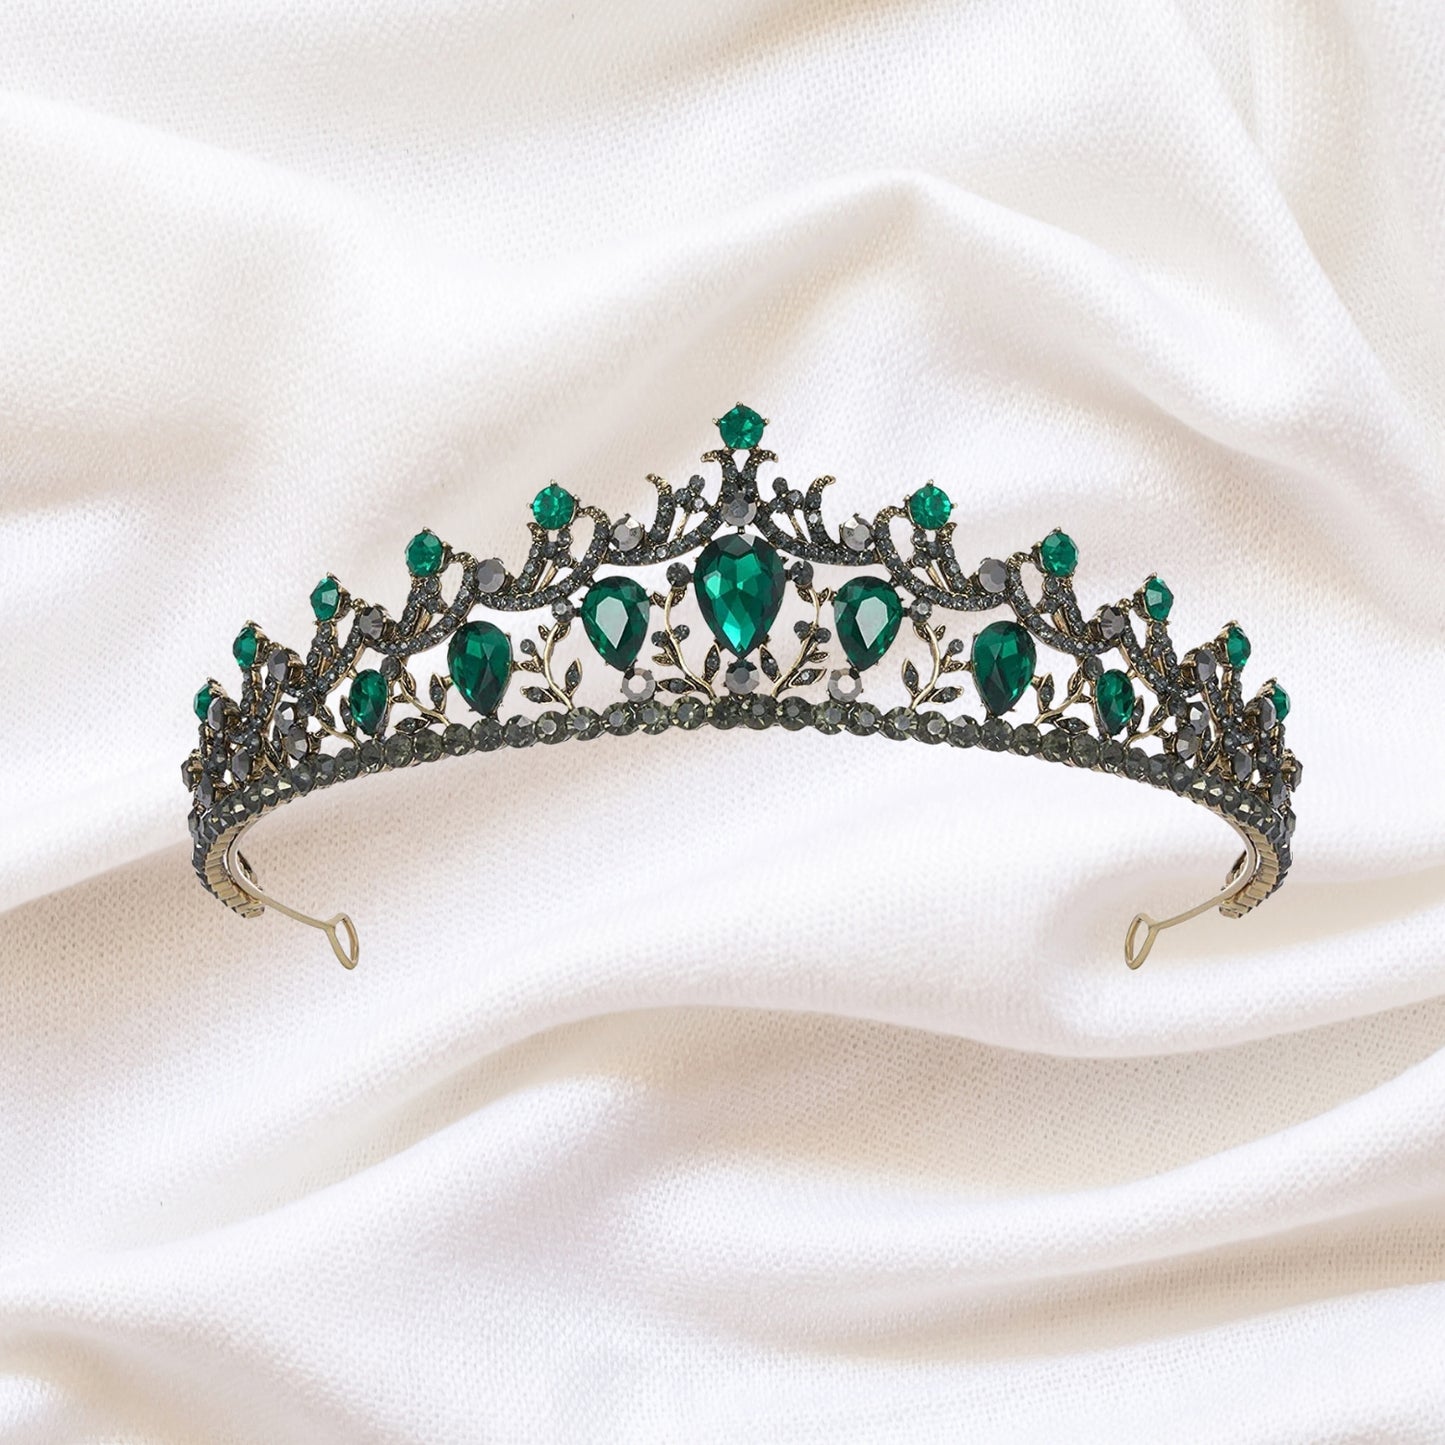 Wedding Tiaras and Crowns for Women Tiaras for Girls Birthday Party Hair Accessories Bride Headband Bride for Prom Christmas